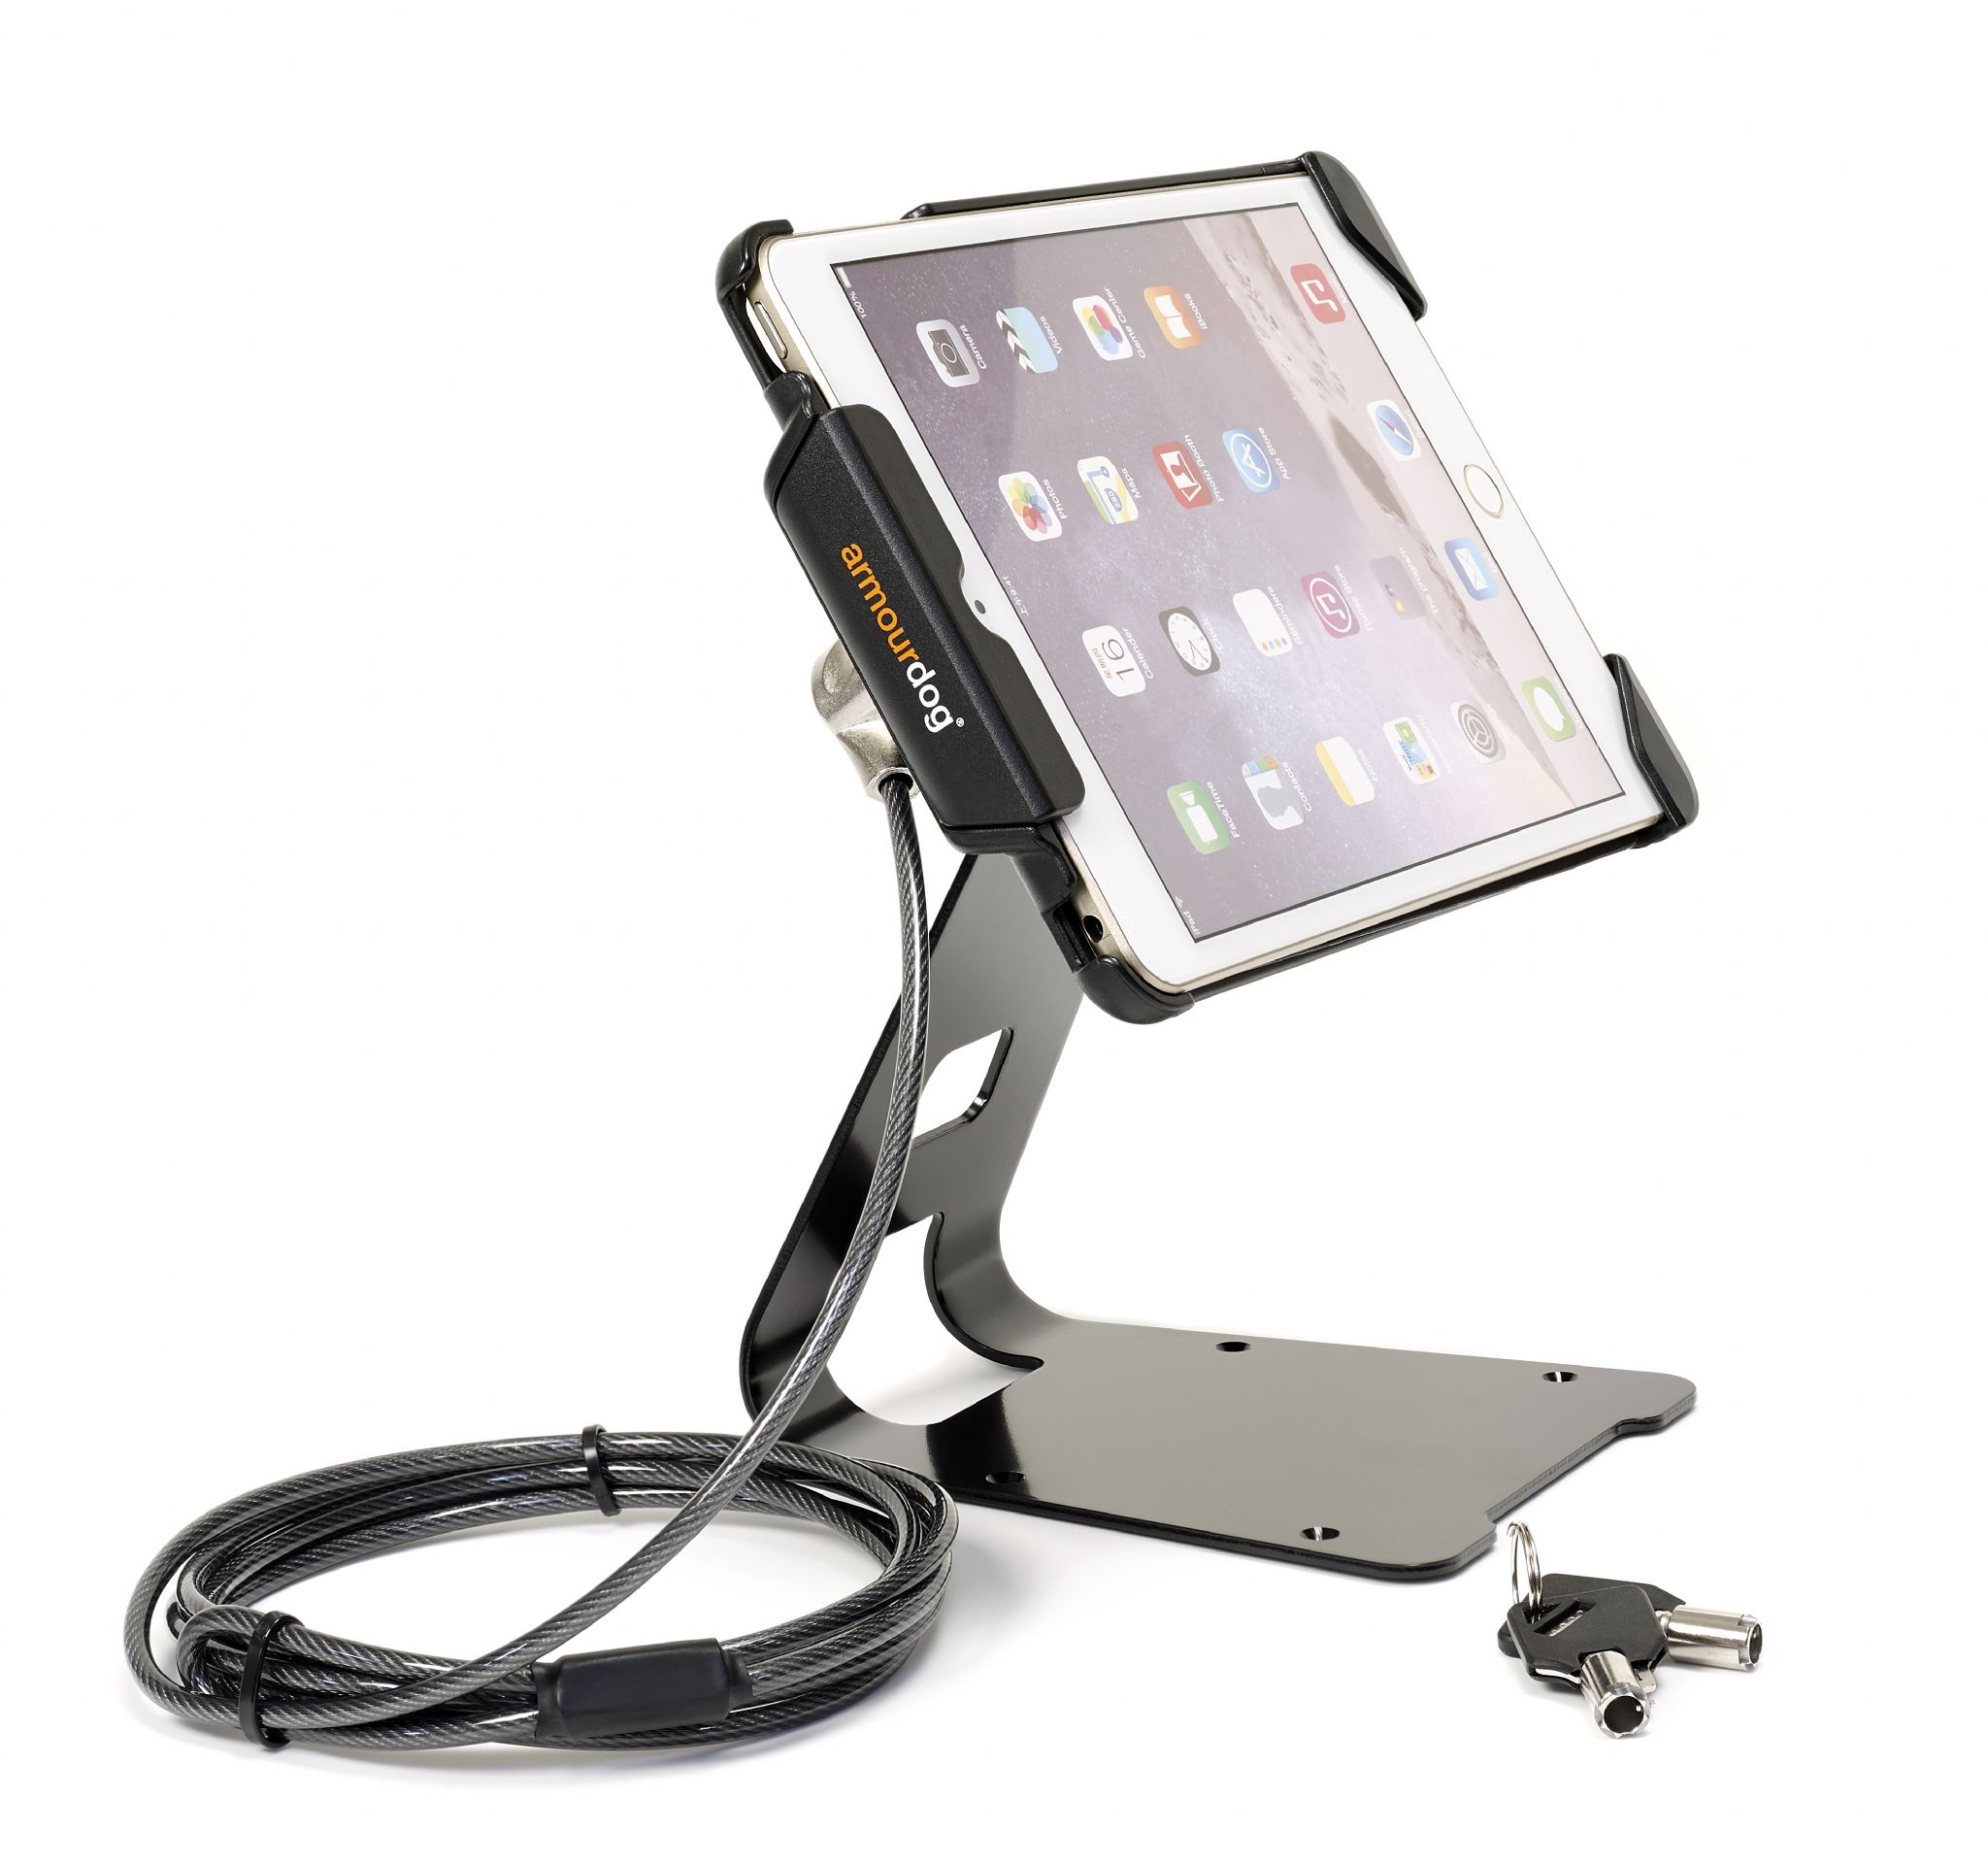 armourdog® secure tilt and swivel security mount / stand for Apple iPad Mini (ALL VERSIONS)